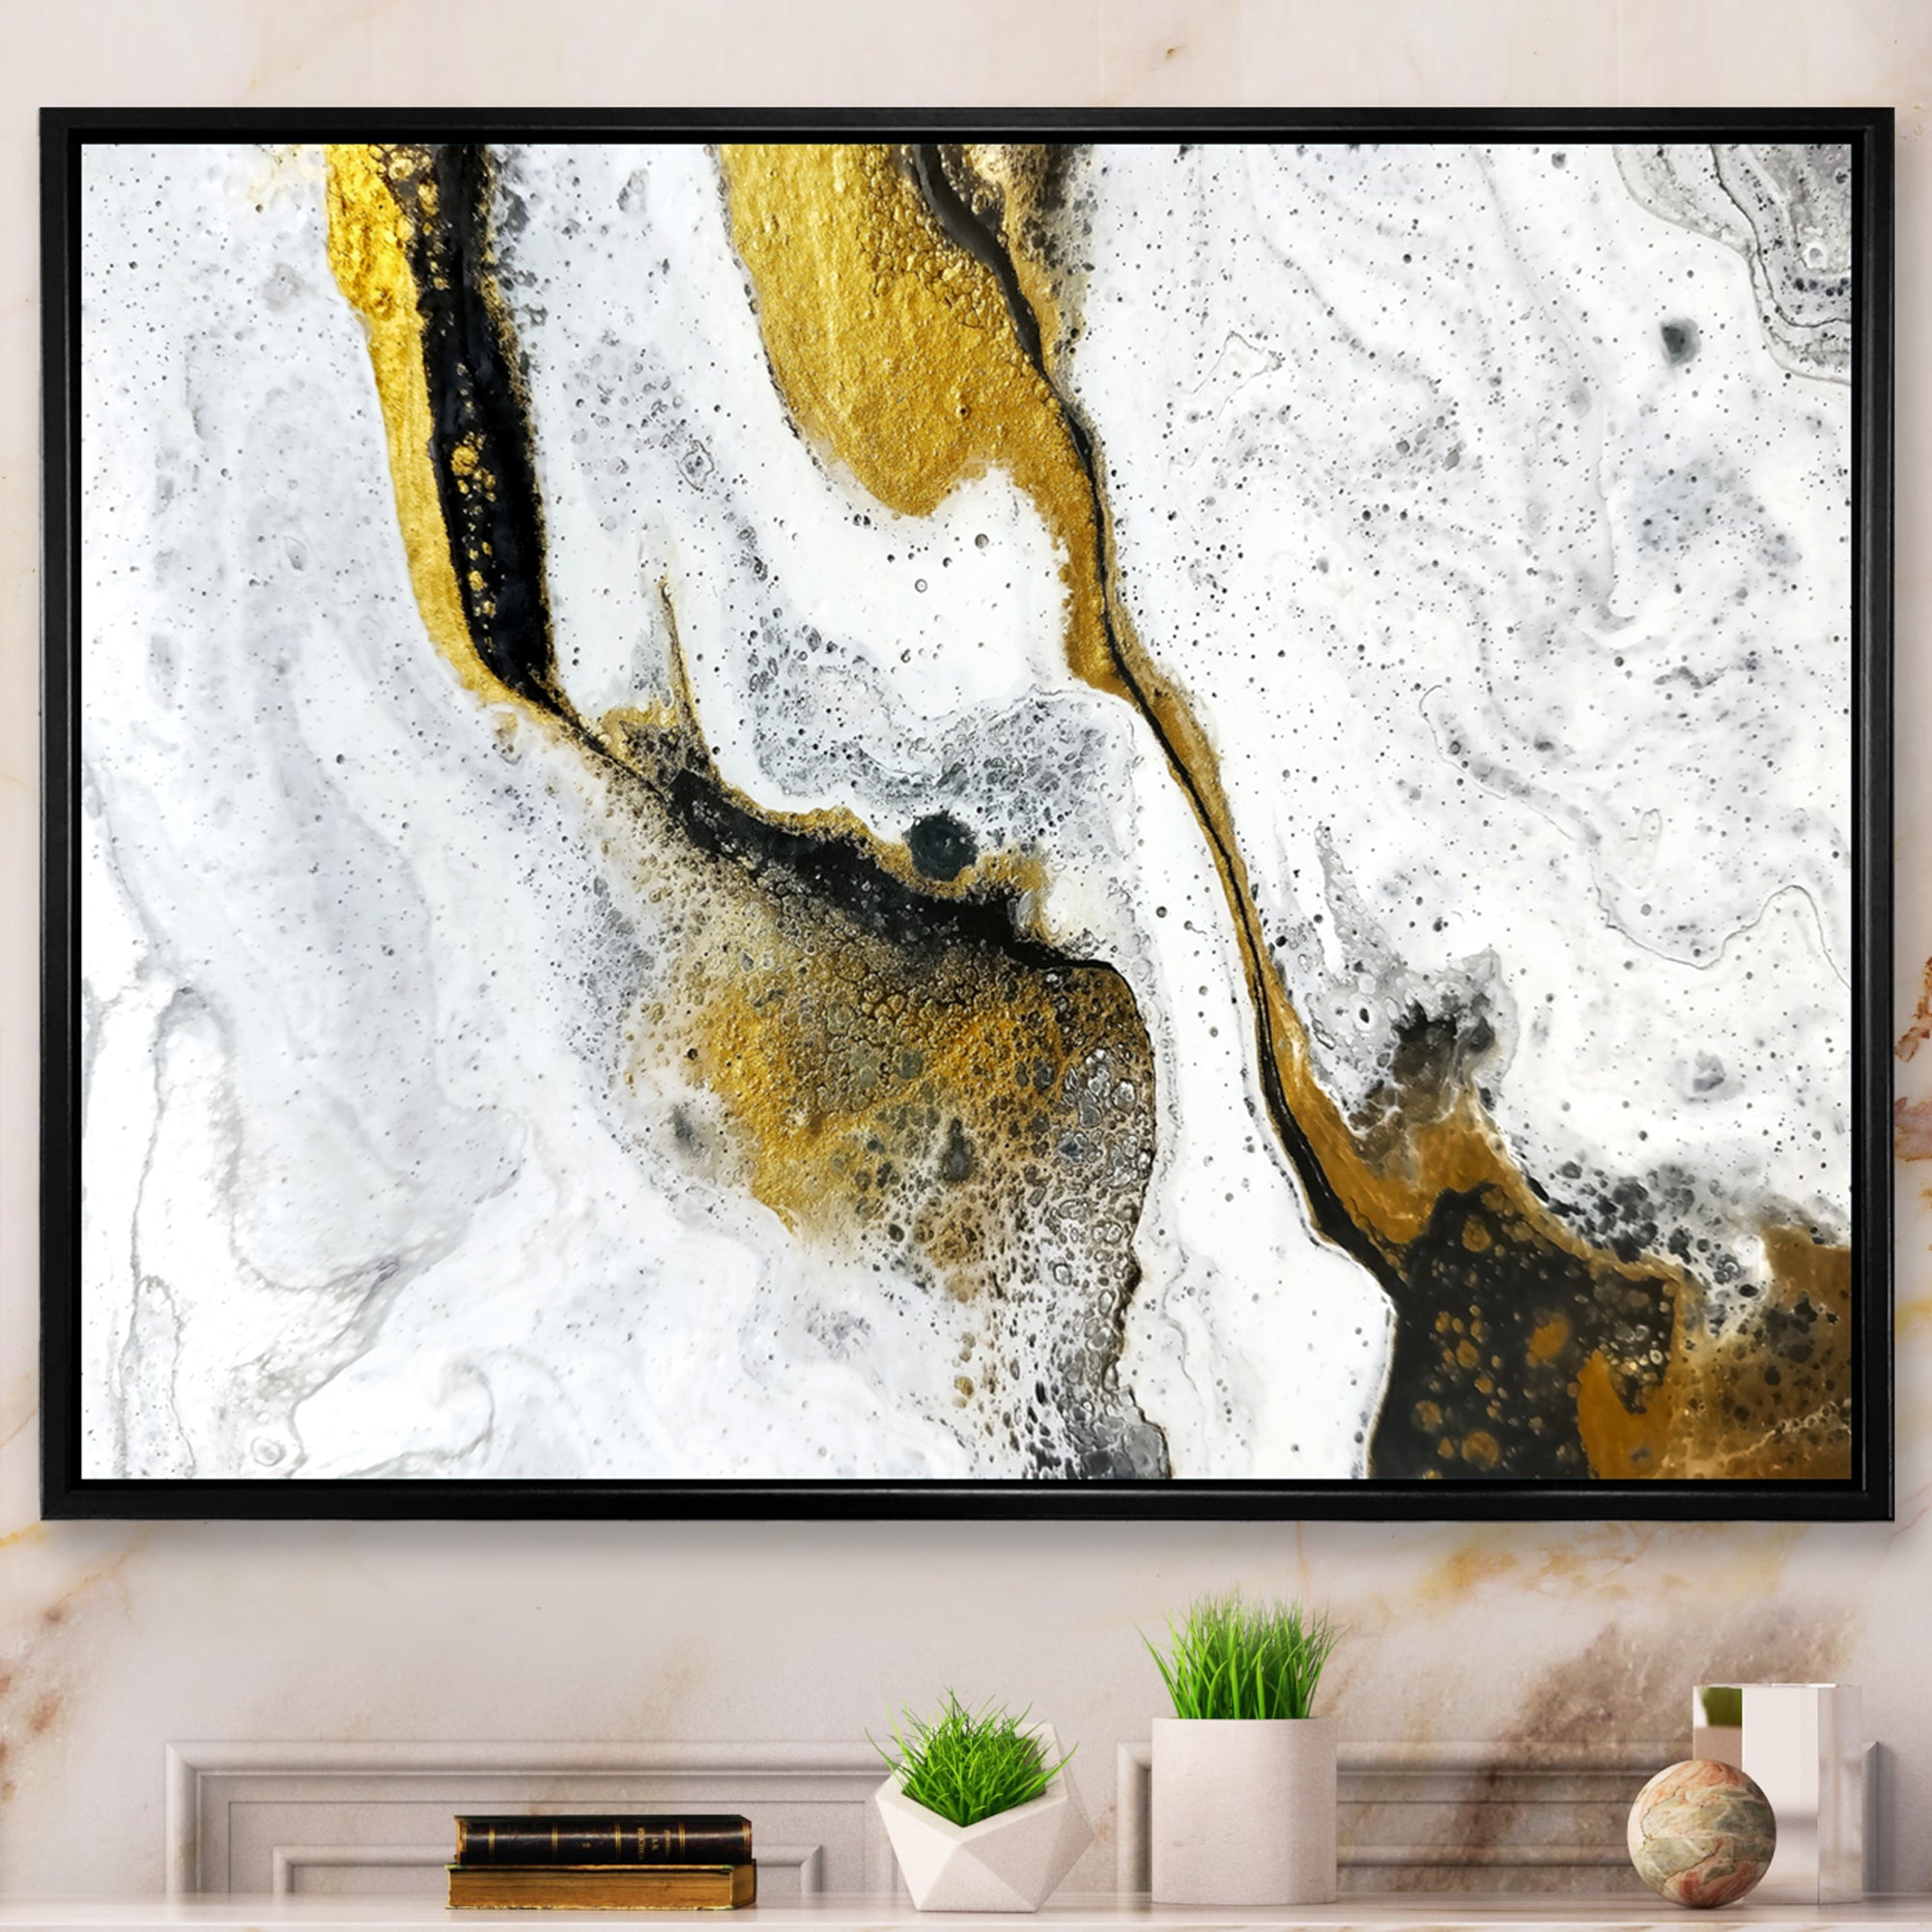 Gold and Black on White Acrylic Marble